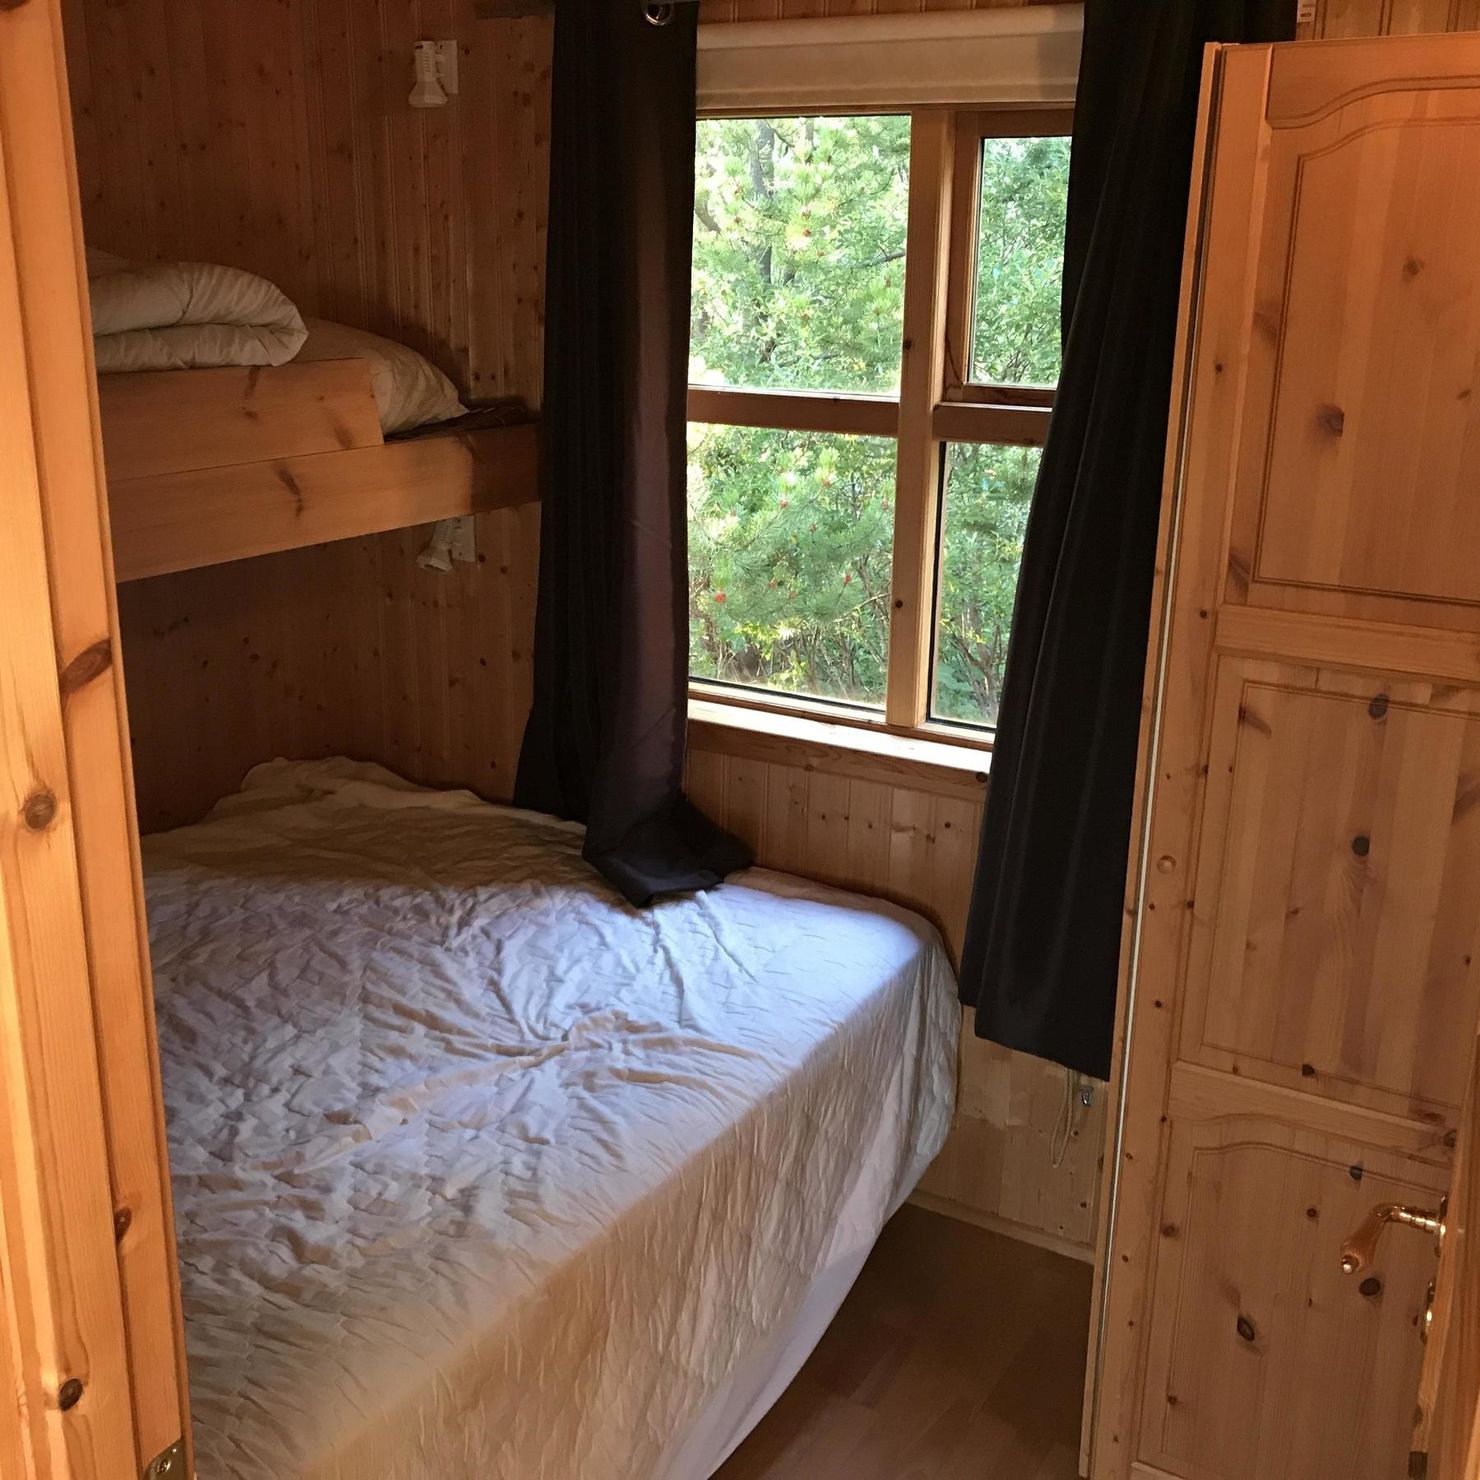 Bedroom with bunk bed and window